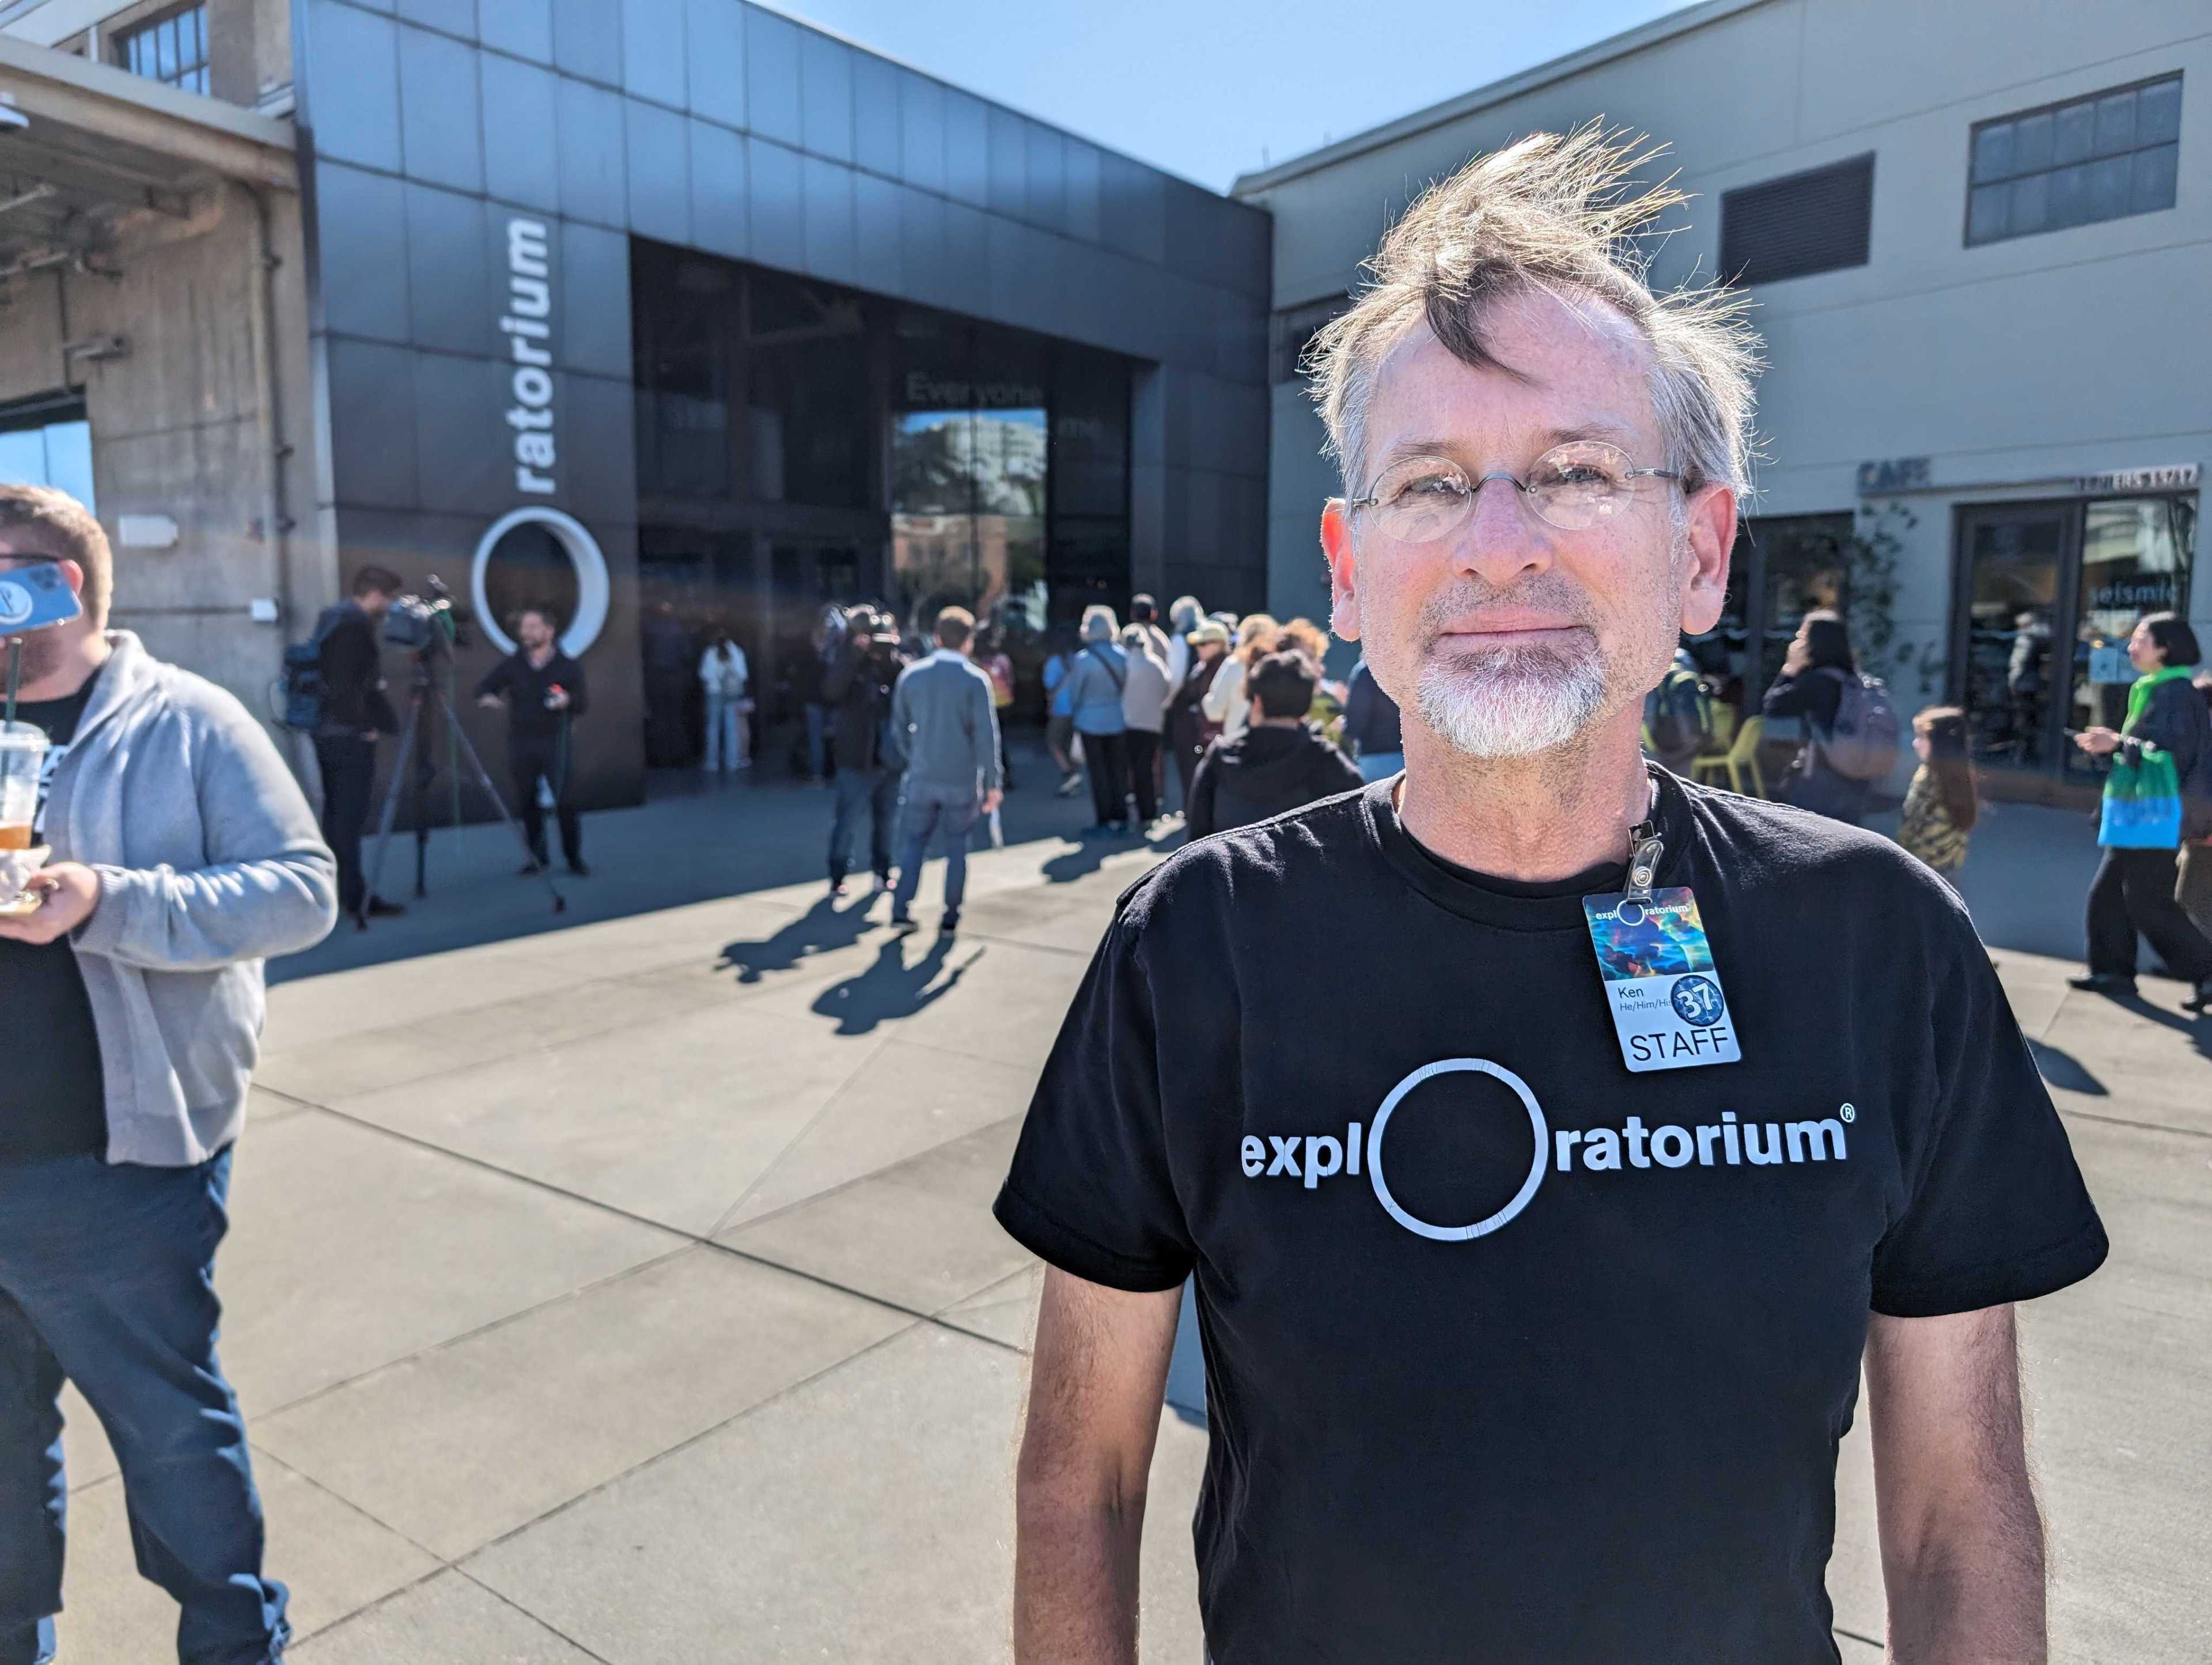 A man in a black Exploratorium staff shirt stands in front of a busy building entrance.